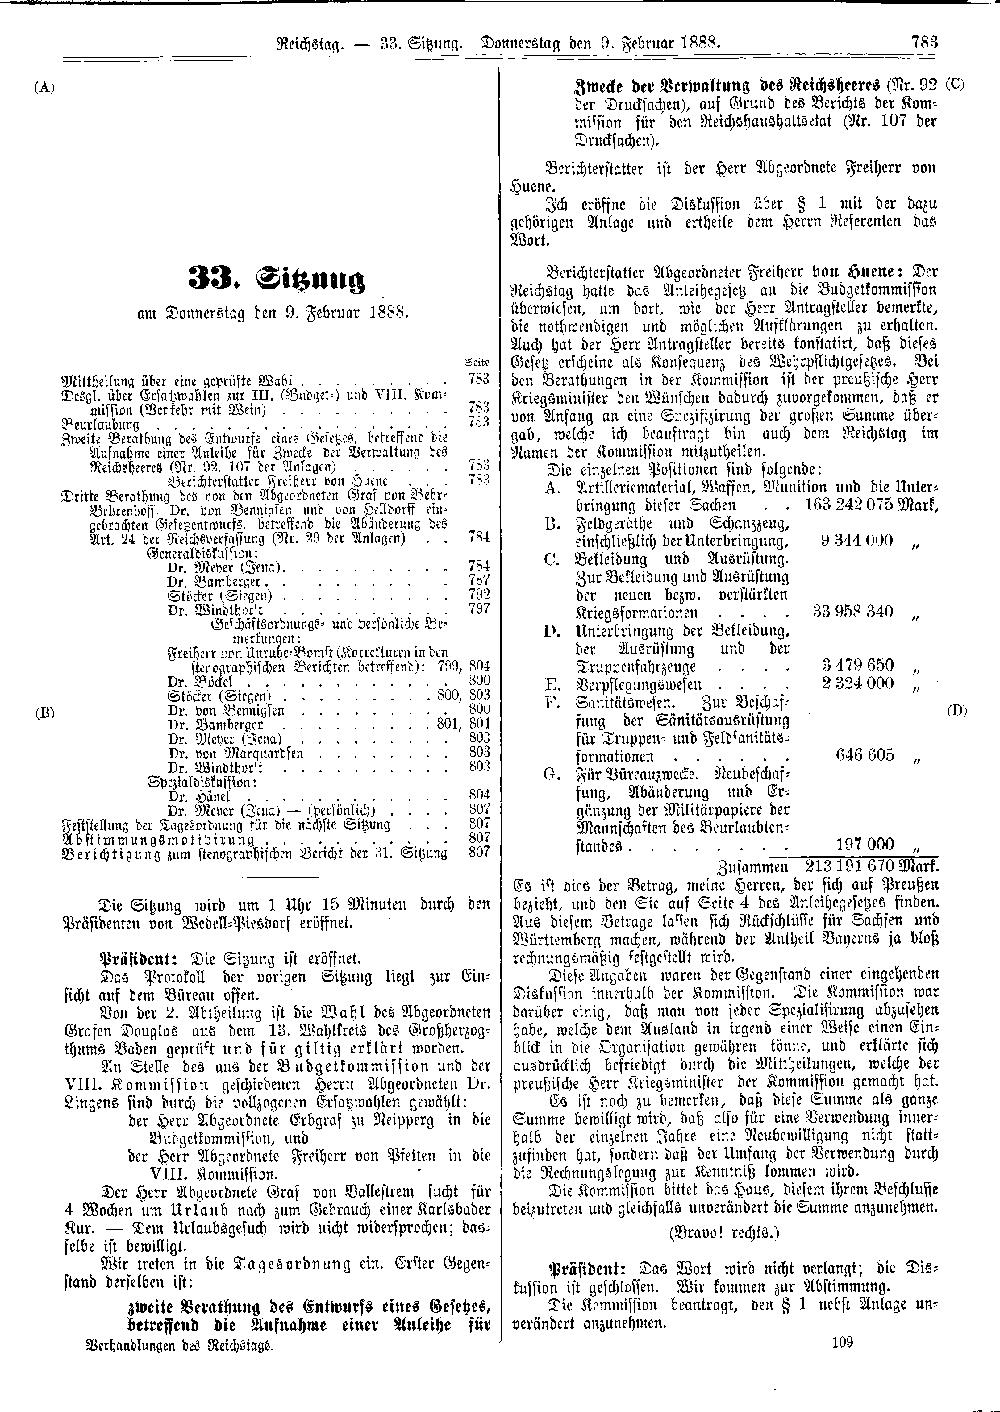 Scan of page 783